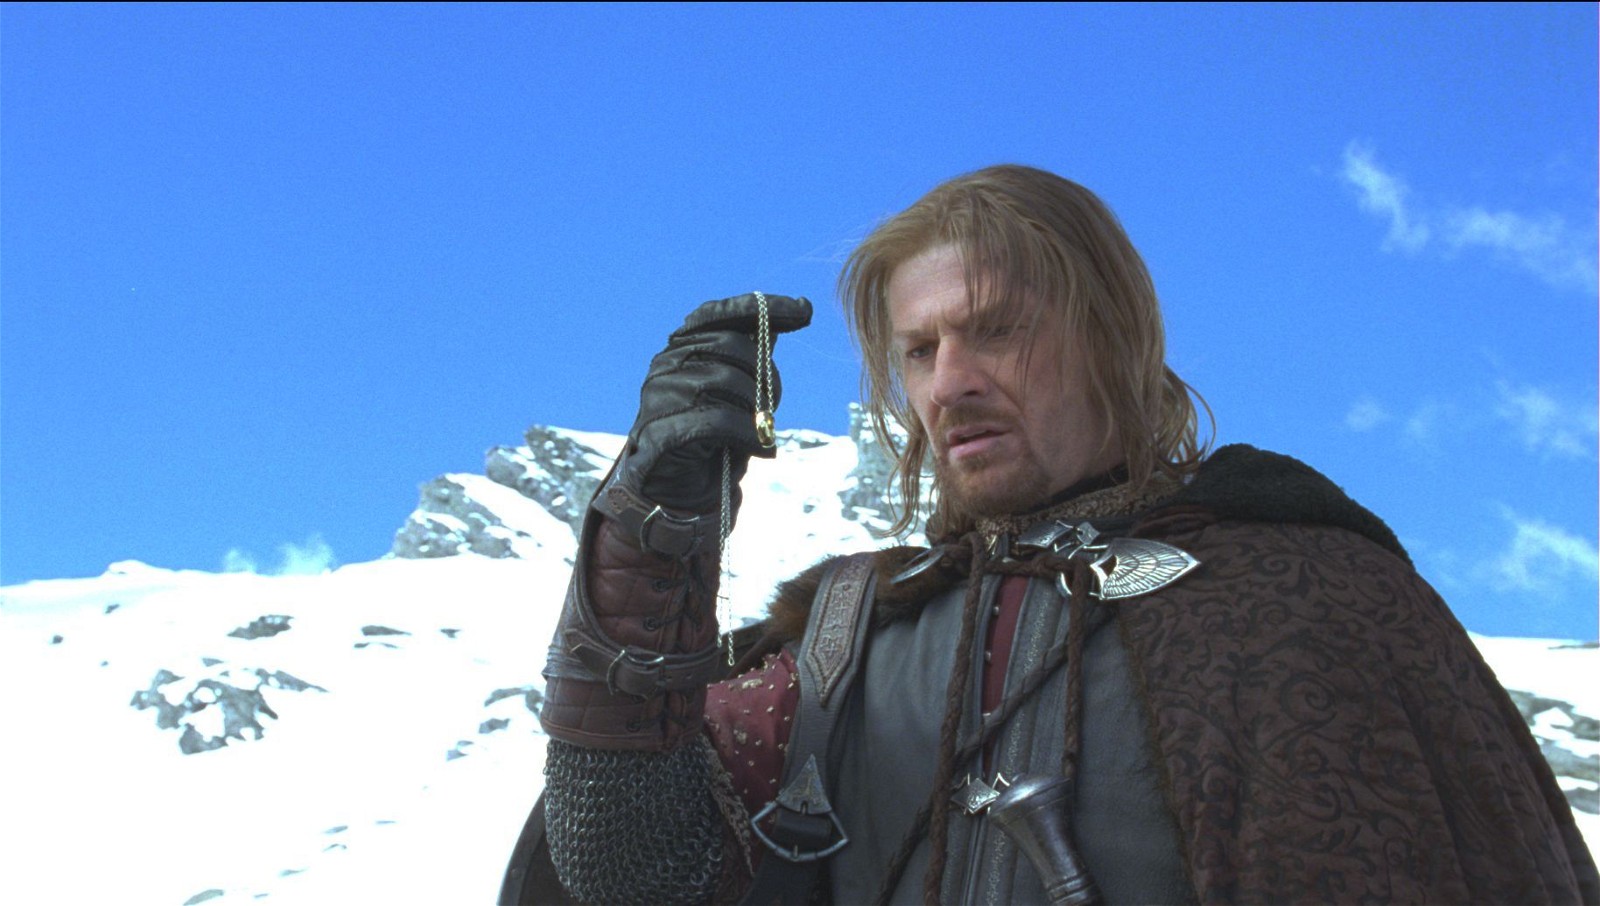 Sean Bean in The Lord of the Rings: The Fellowship of the Ring.